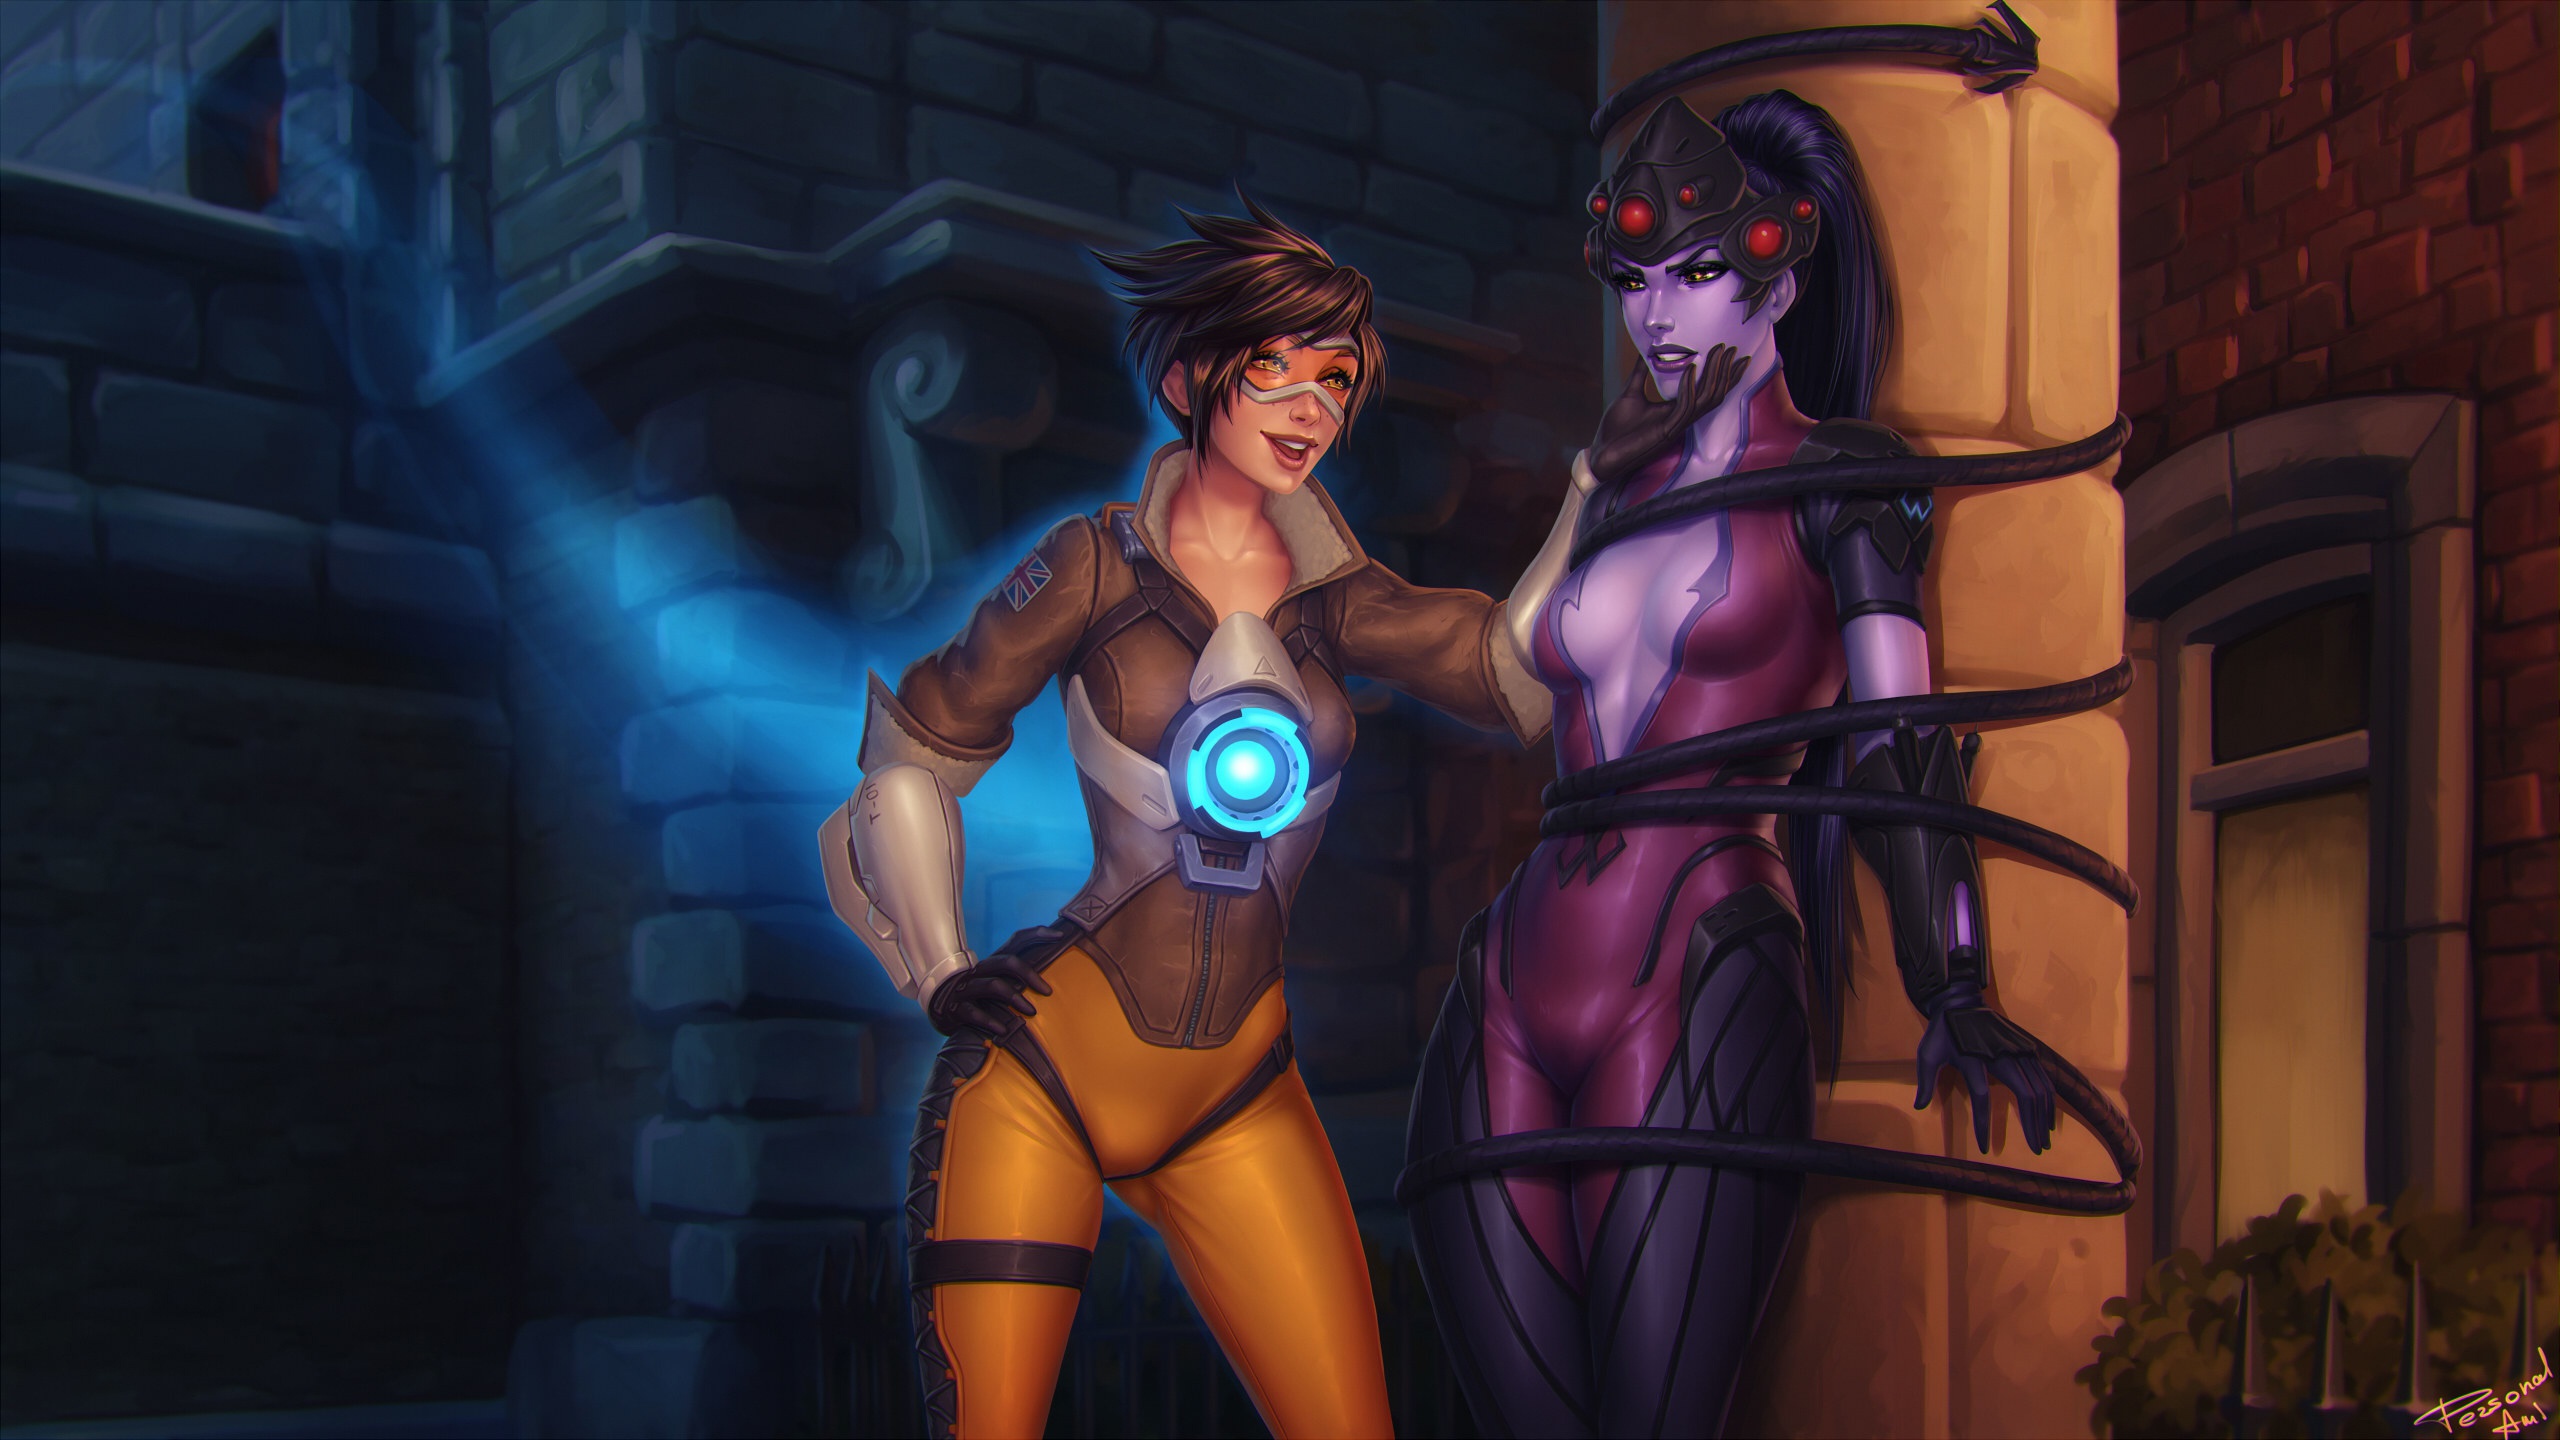 General 2560x1440 Blizzard Entertainment Overwatch Tracer (Overwatch) PC gaming fan art digital art signature Personal ami BDSM